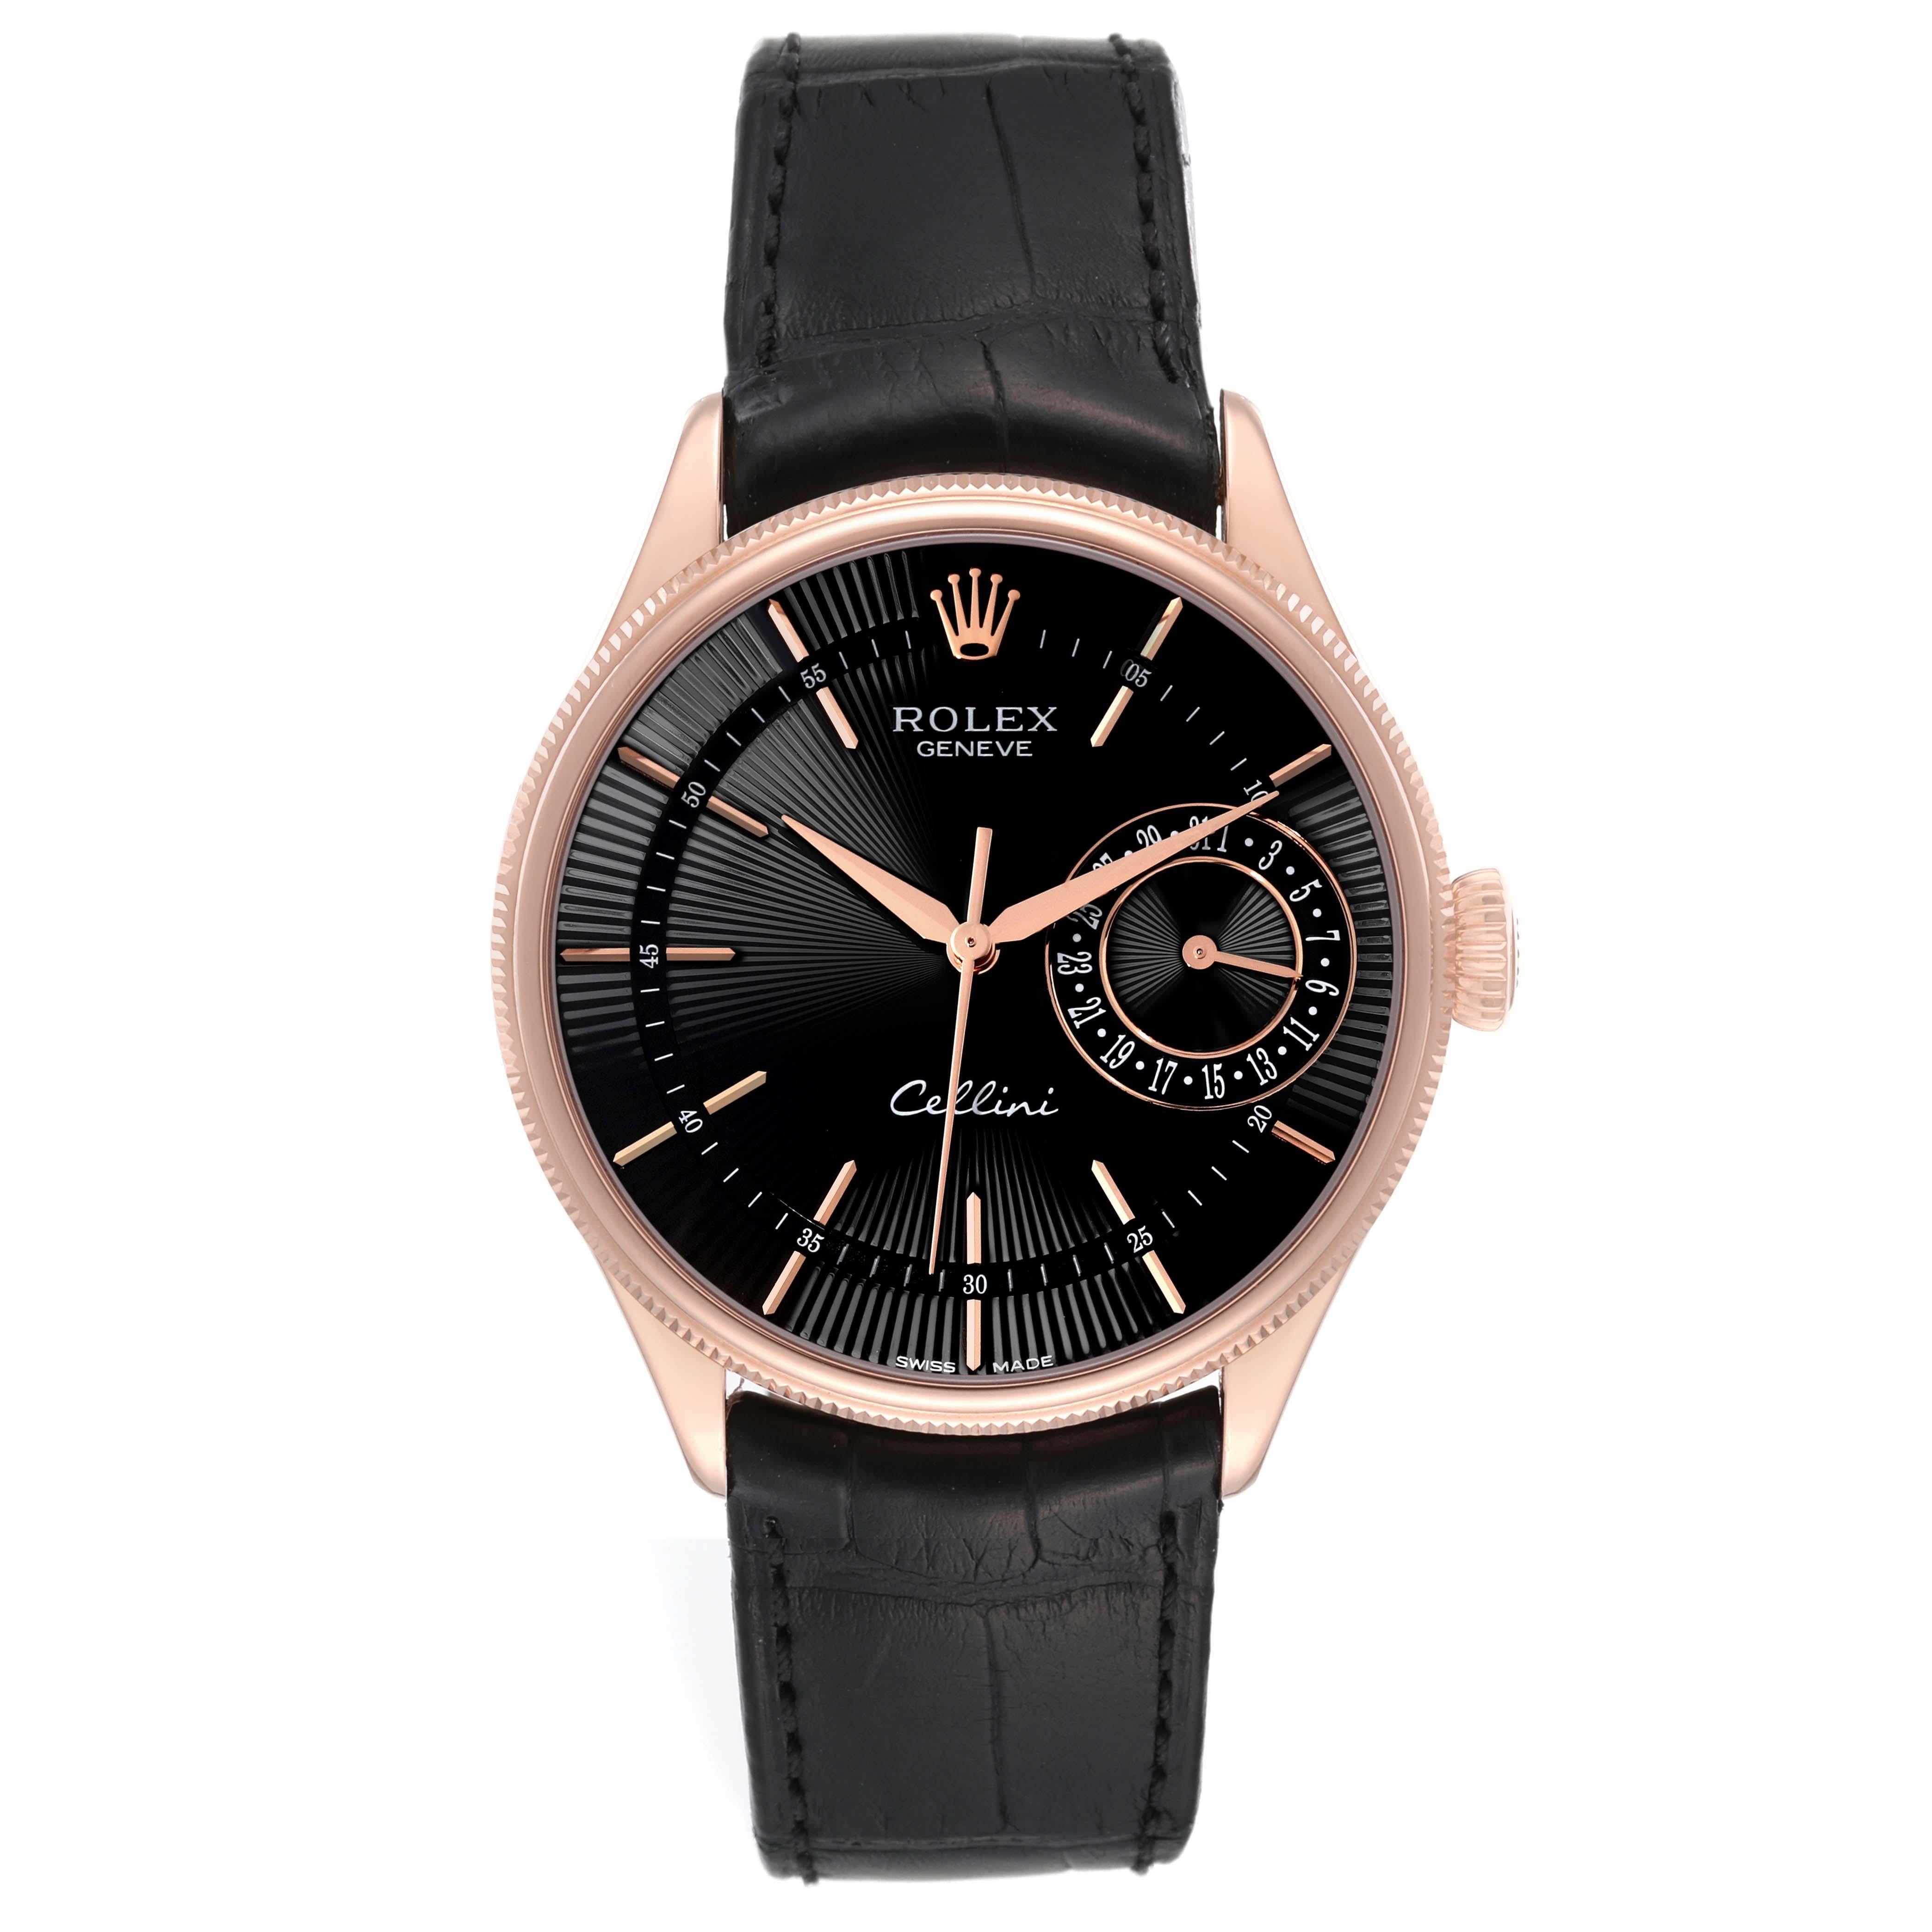 Rolex Cellini Date Black Dial Rose Gold Automatic Mens Watch 50515 Card. Automatic self-winding movement. Officially certified Swiss chronometer (COSC). Paramagnetic blue Parachrom hairspring. Bidirectional self-winding via Perpetual rotor. 18K rose